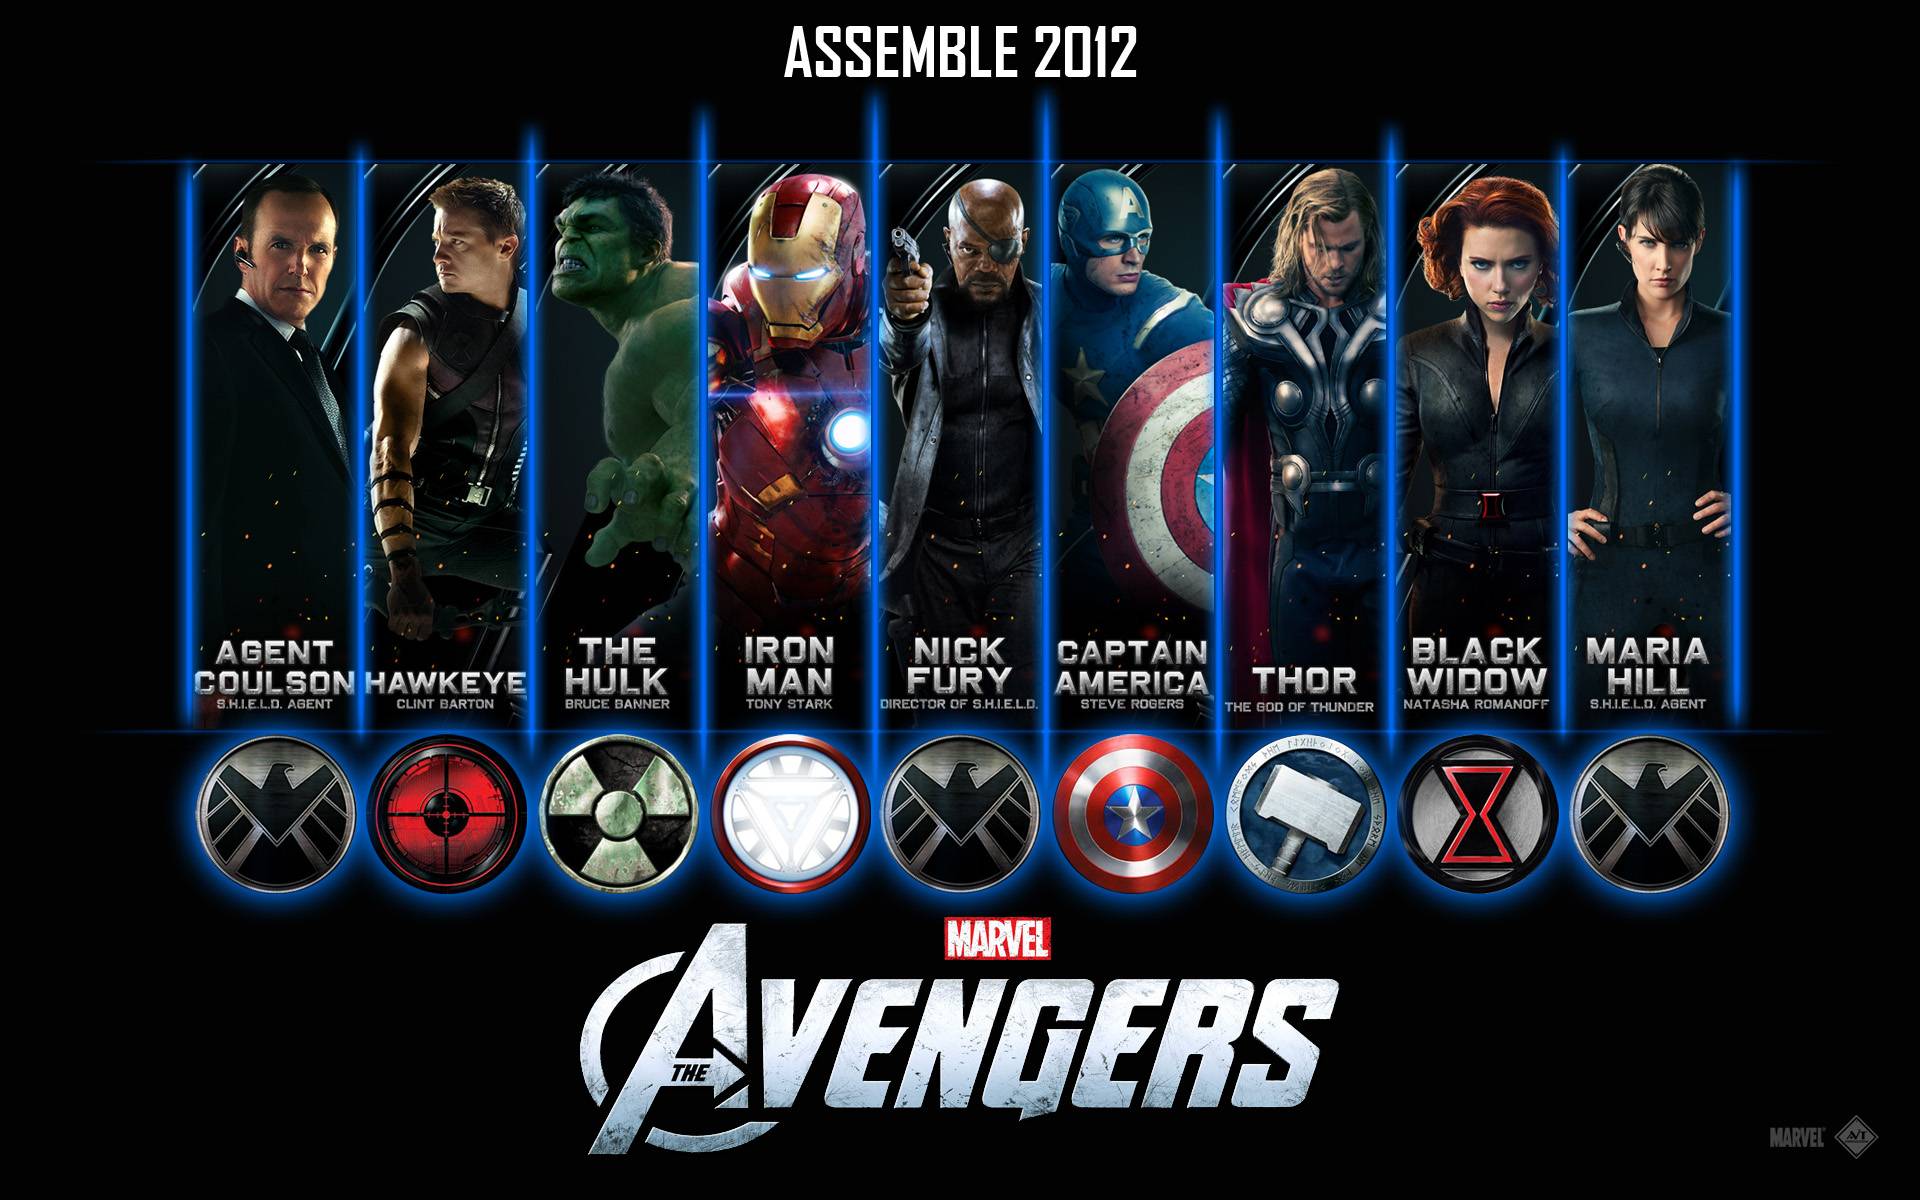 the avengers wallpaper. Your Geeky Wallpaper